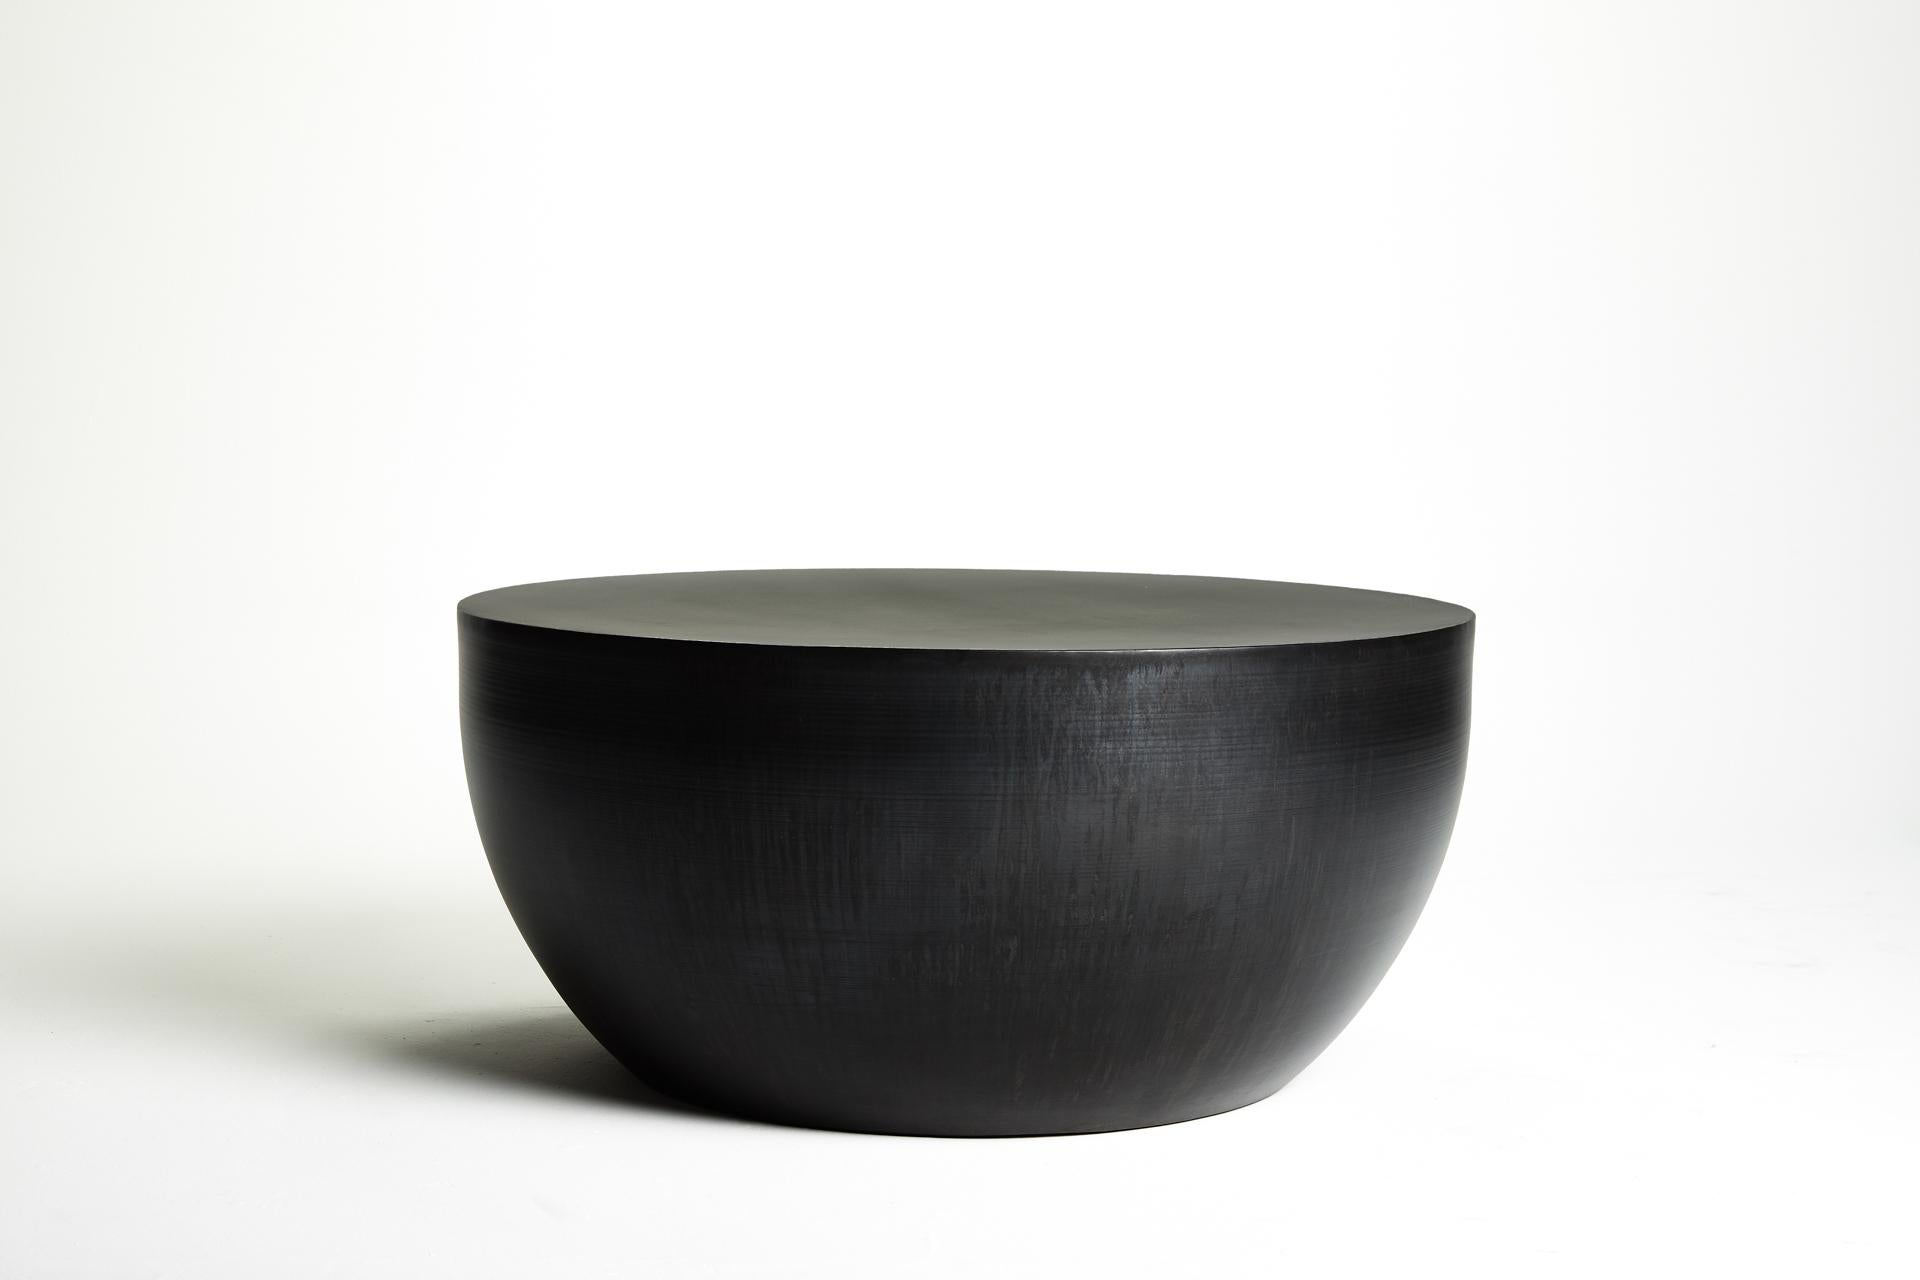 Ida table by Ben Barber Studio
Dimensions: Diameter 91.5 x height 43.2 cm
Materials: Steel
Finishes: Blackened Steel

Further delving into the vocabulary of the spun collection. This large 91.5 cm diameter coffee table bridges the gap between